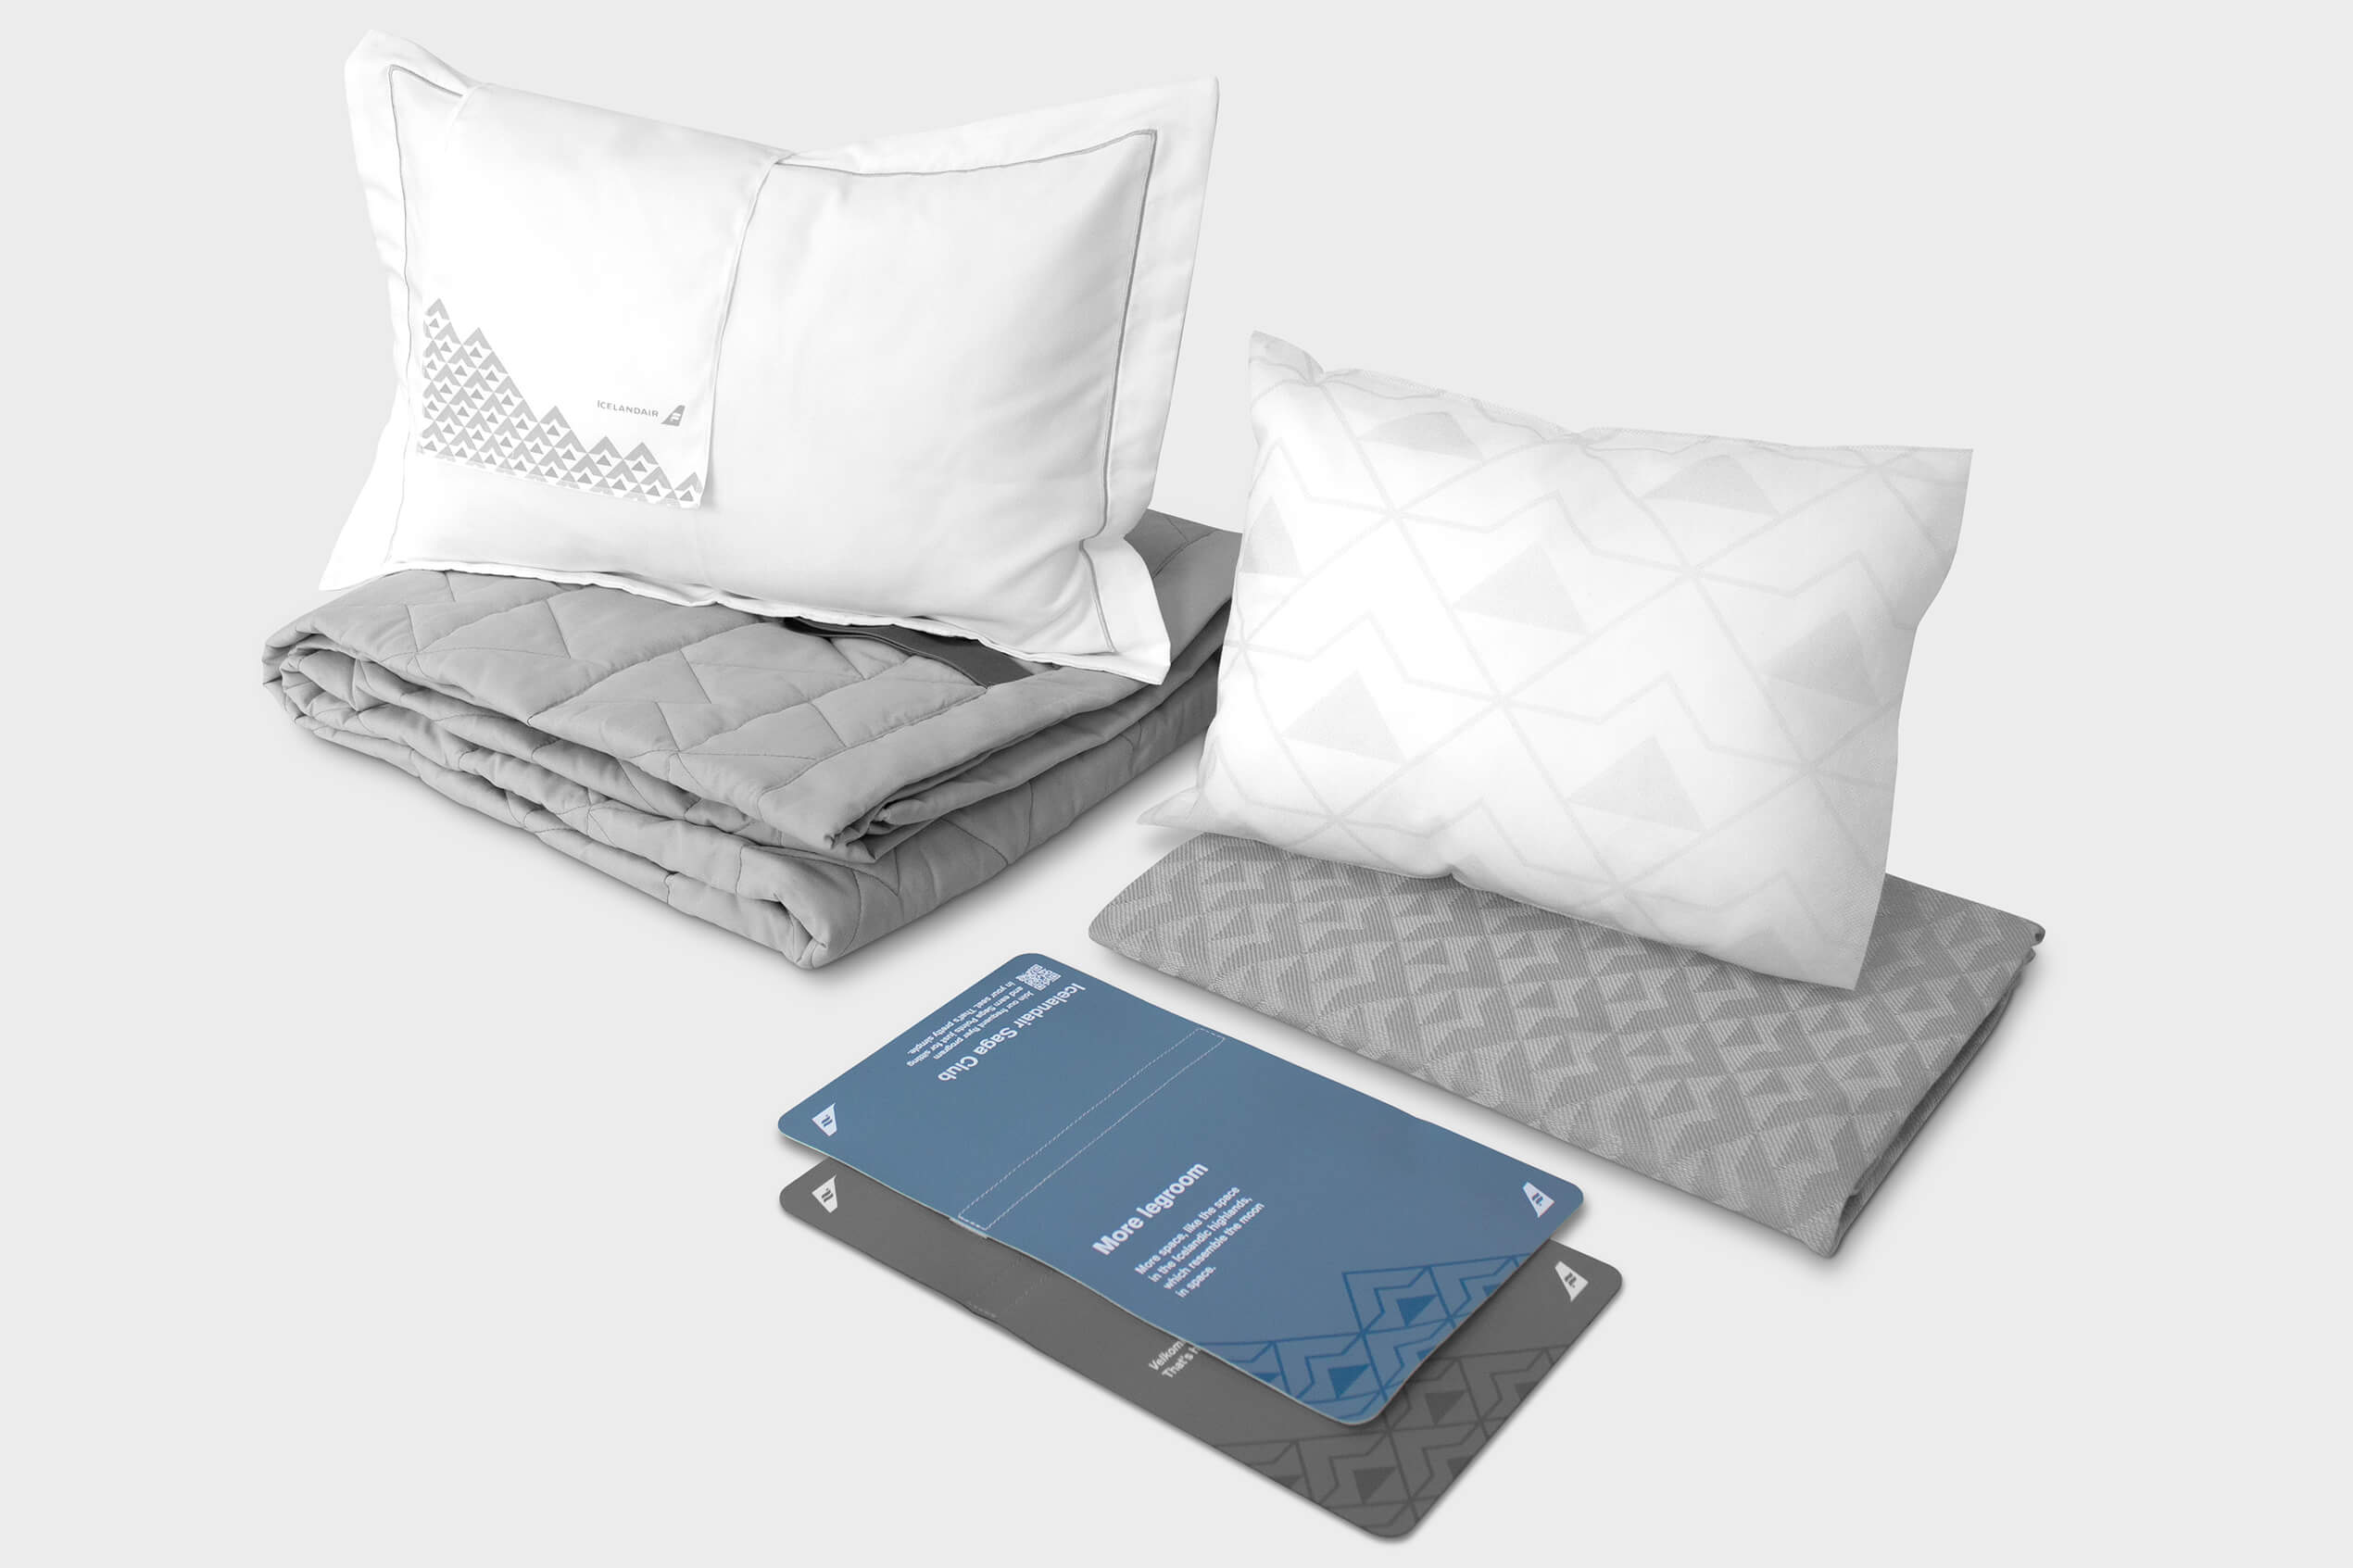 The new Icelandair onboard textile collection which consists of pillows, blankets and information plaques